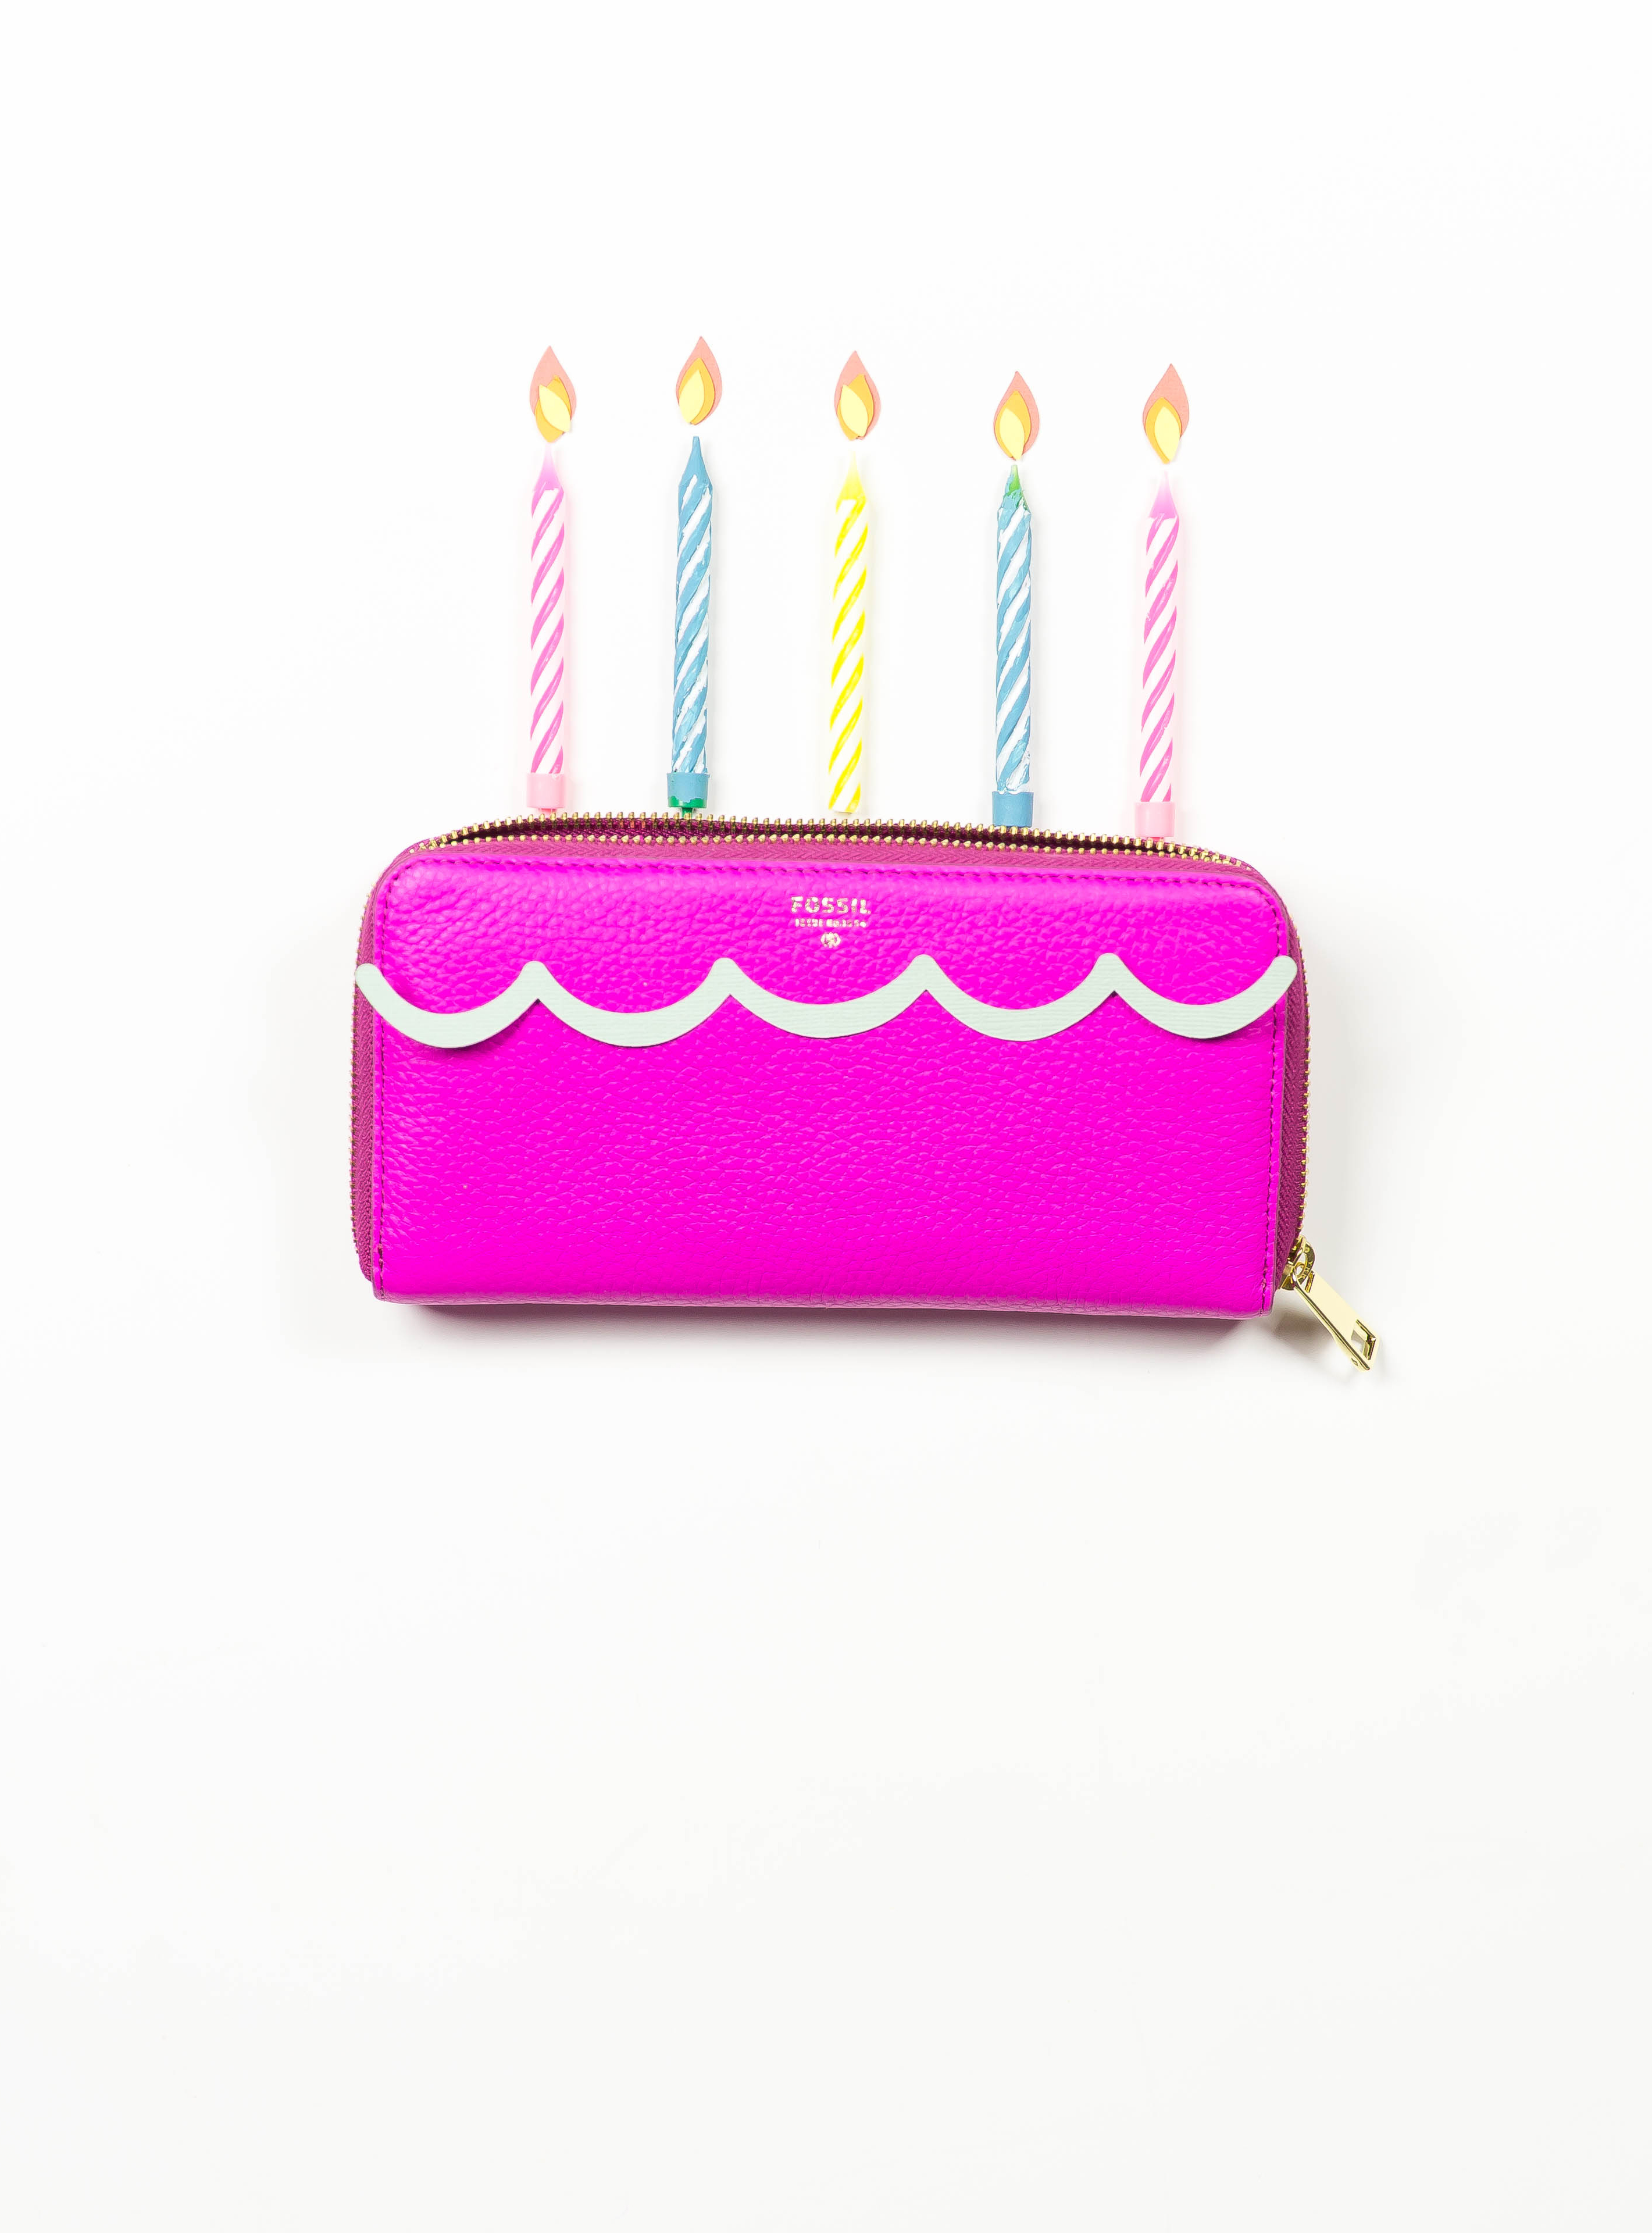 How to take rad Instagram photos using ordinary objects. A cake made from a wallet.